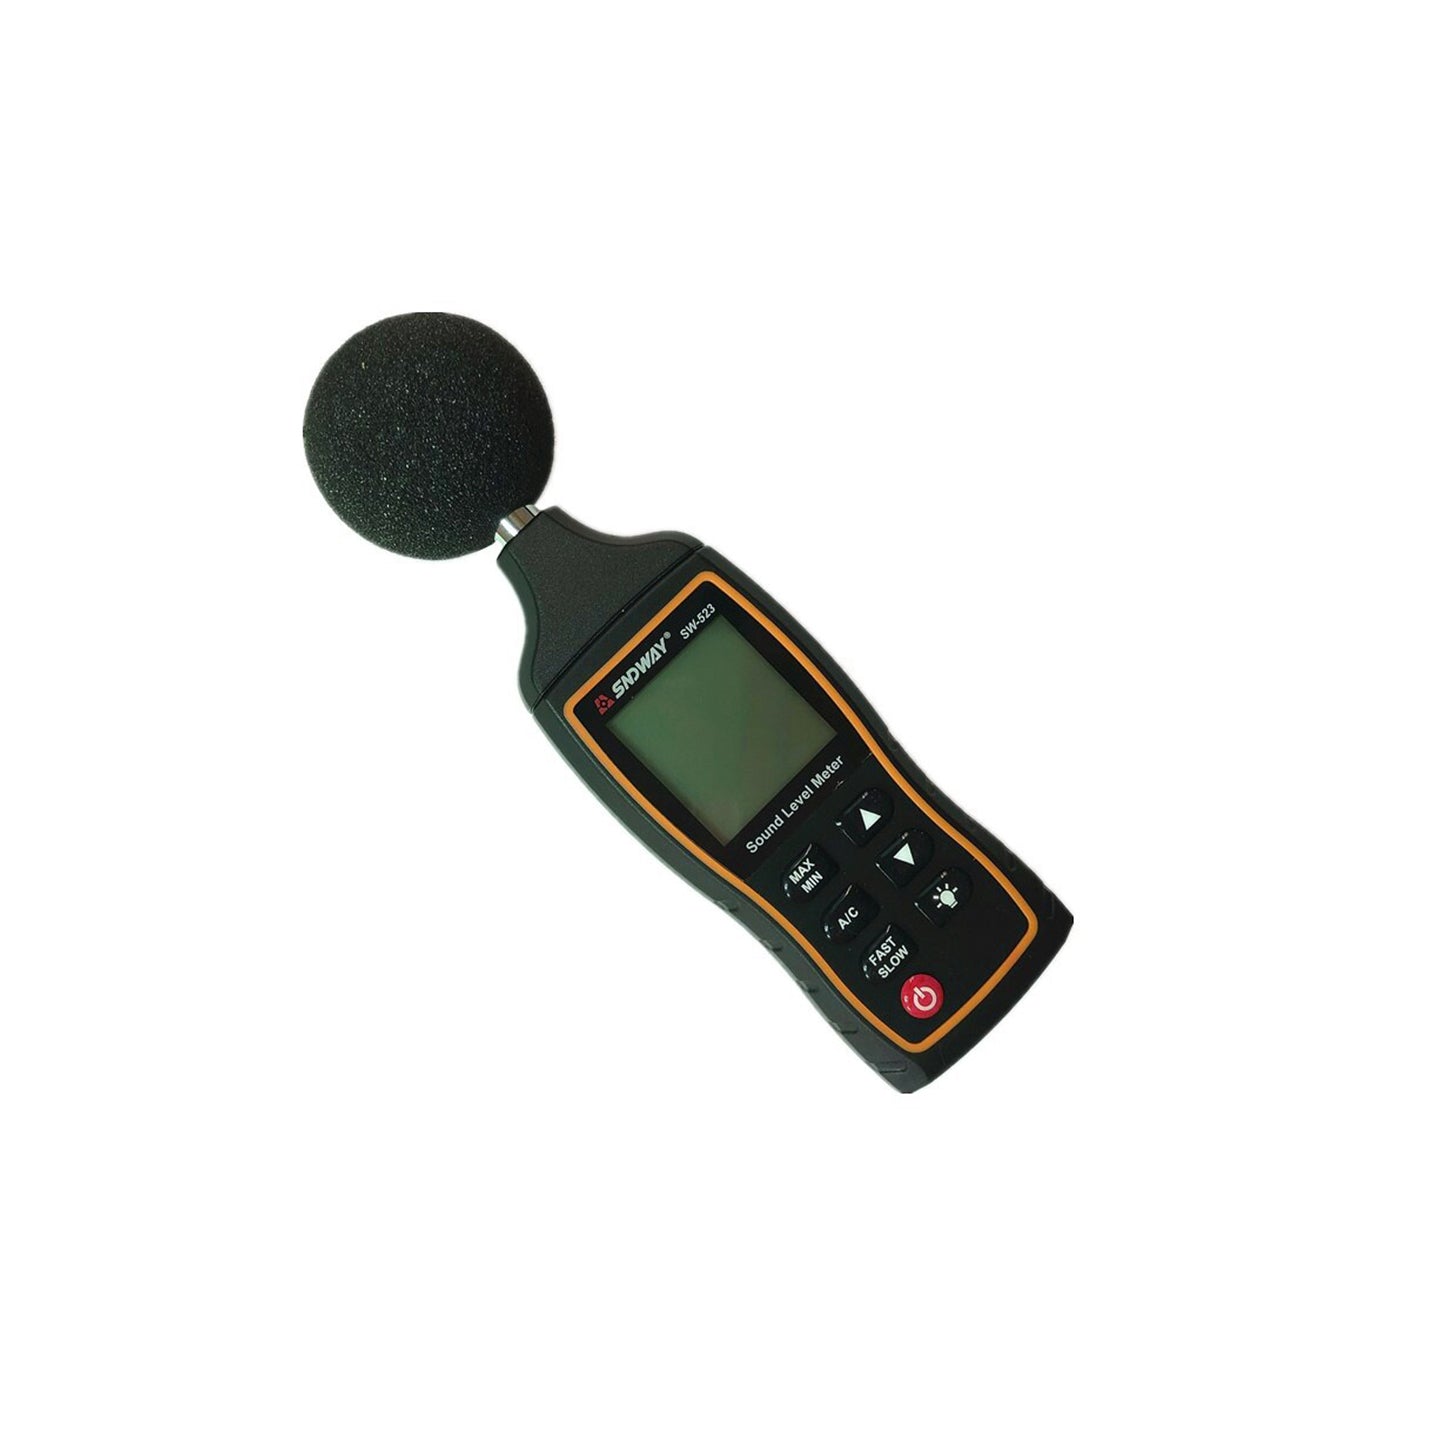 SNDWAY SW-523 Digital Sound Level Meter Measuring Instrument with LCD Display and Data Storage function for Monitoring or Controlling Noise Volume